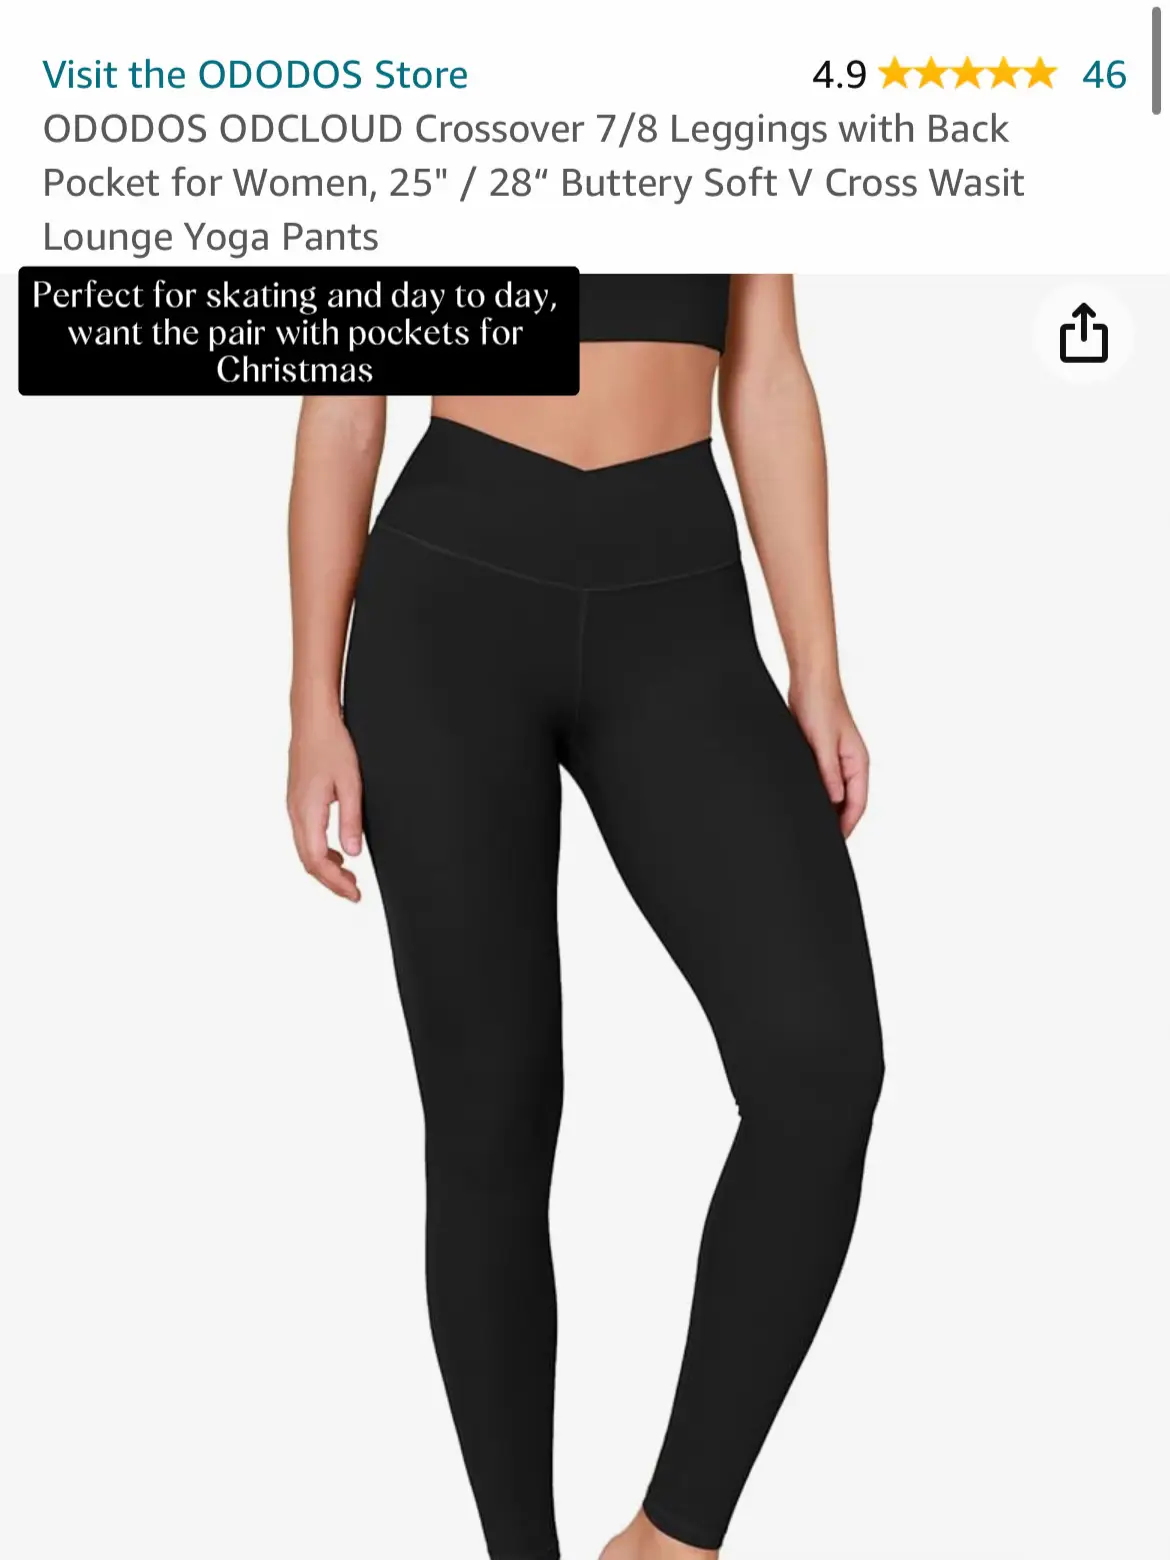 ODODOS ODCLOUD 2-Pack Buttery Soft Lounge Yoga Capris for Women 19